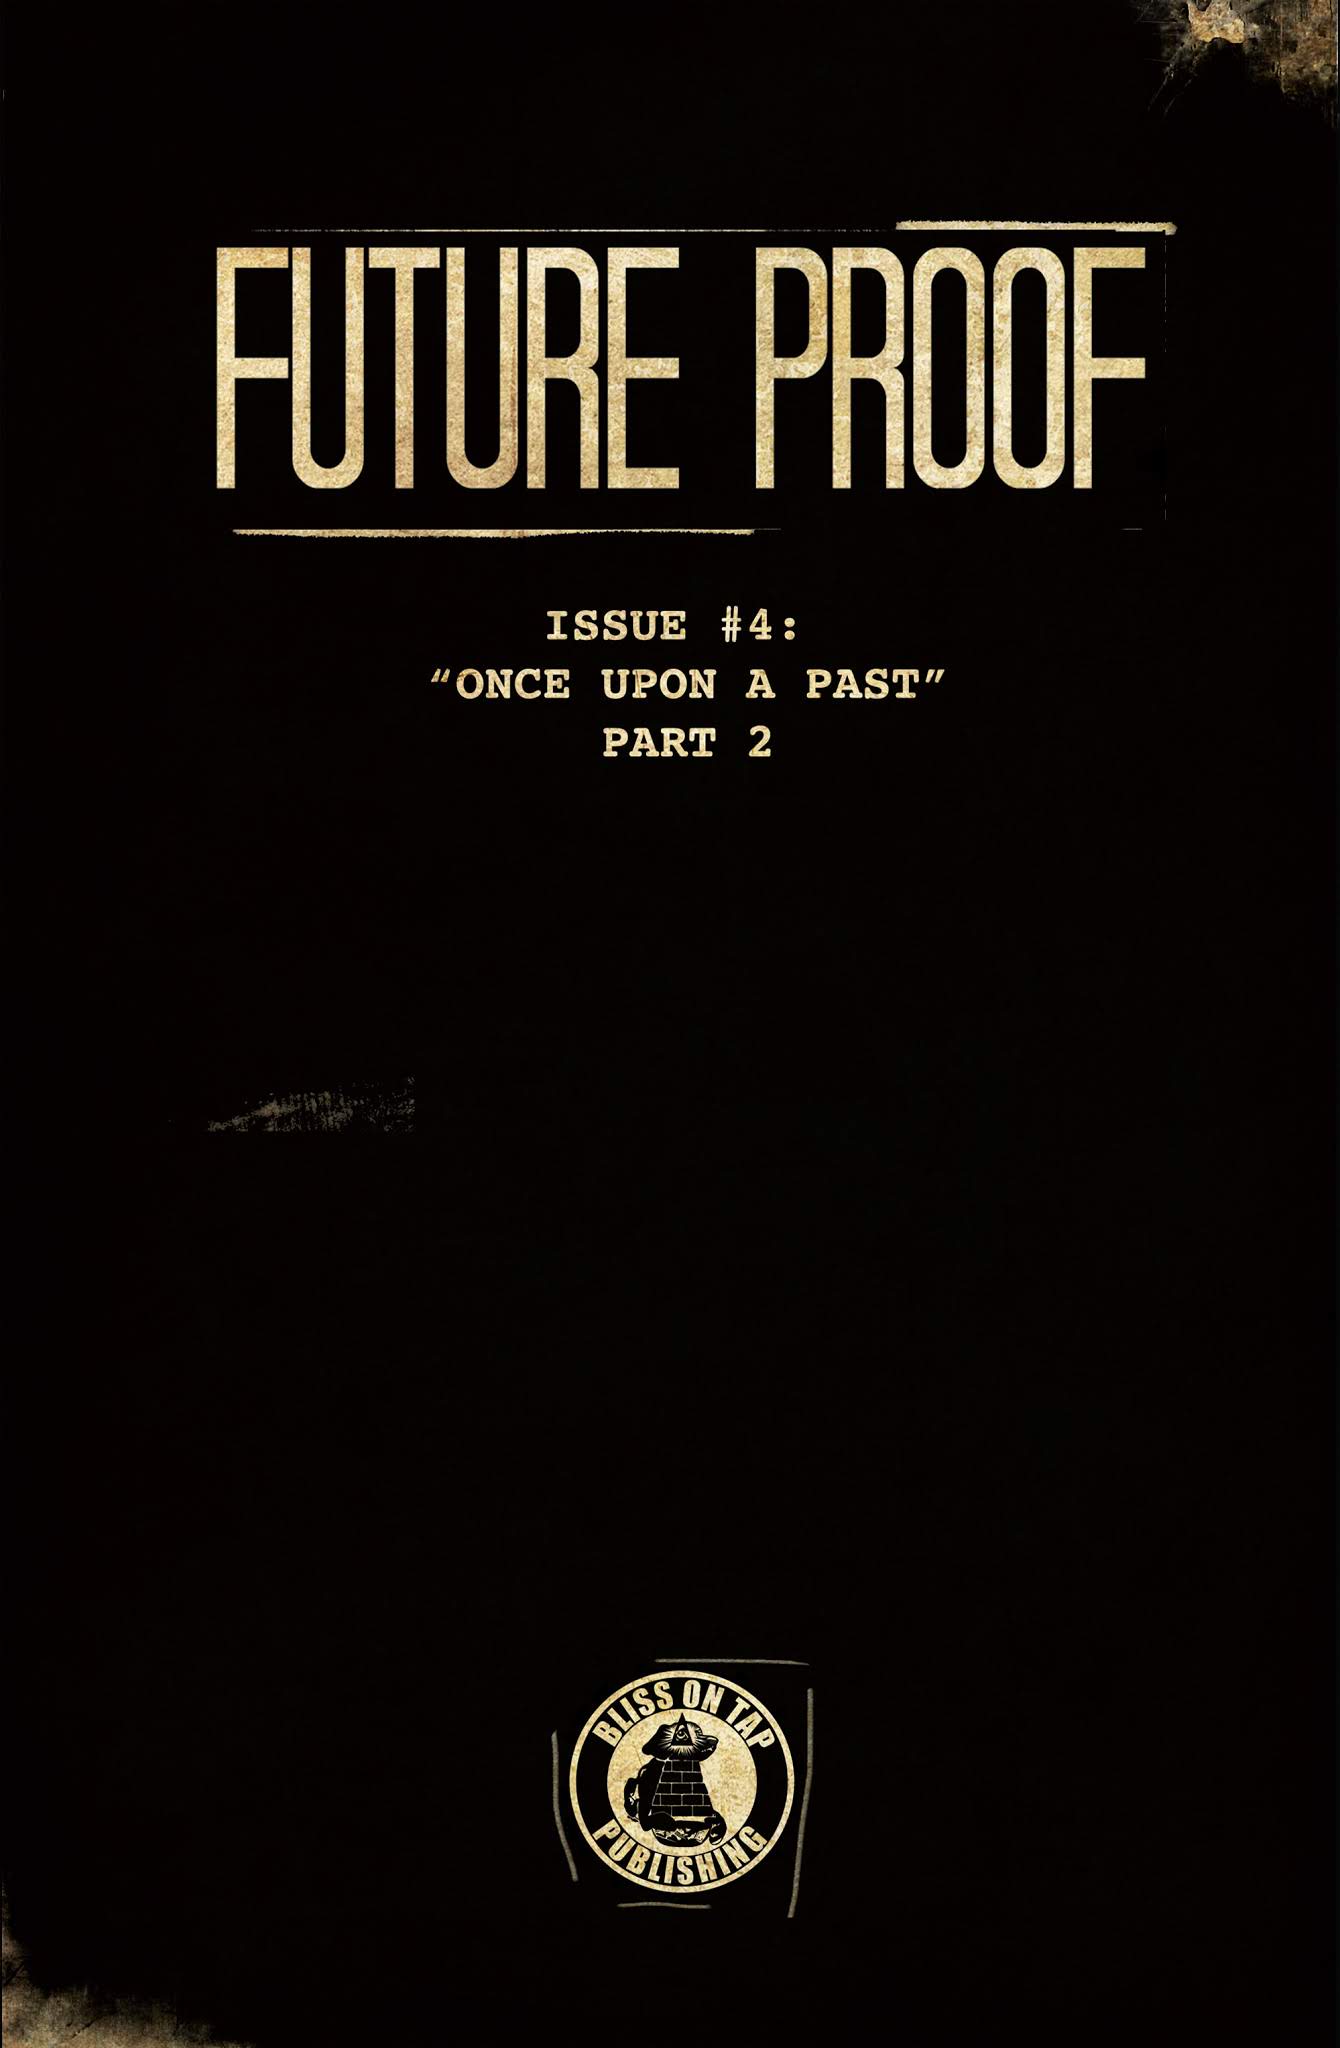 Read online Future Proof comic -  Issue #4 - 3